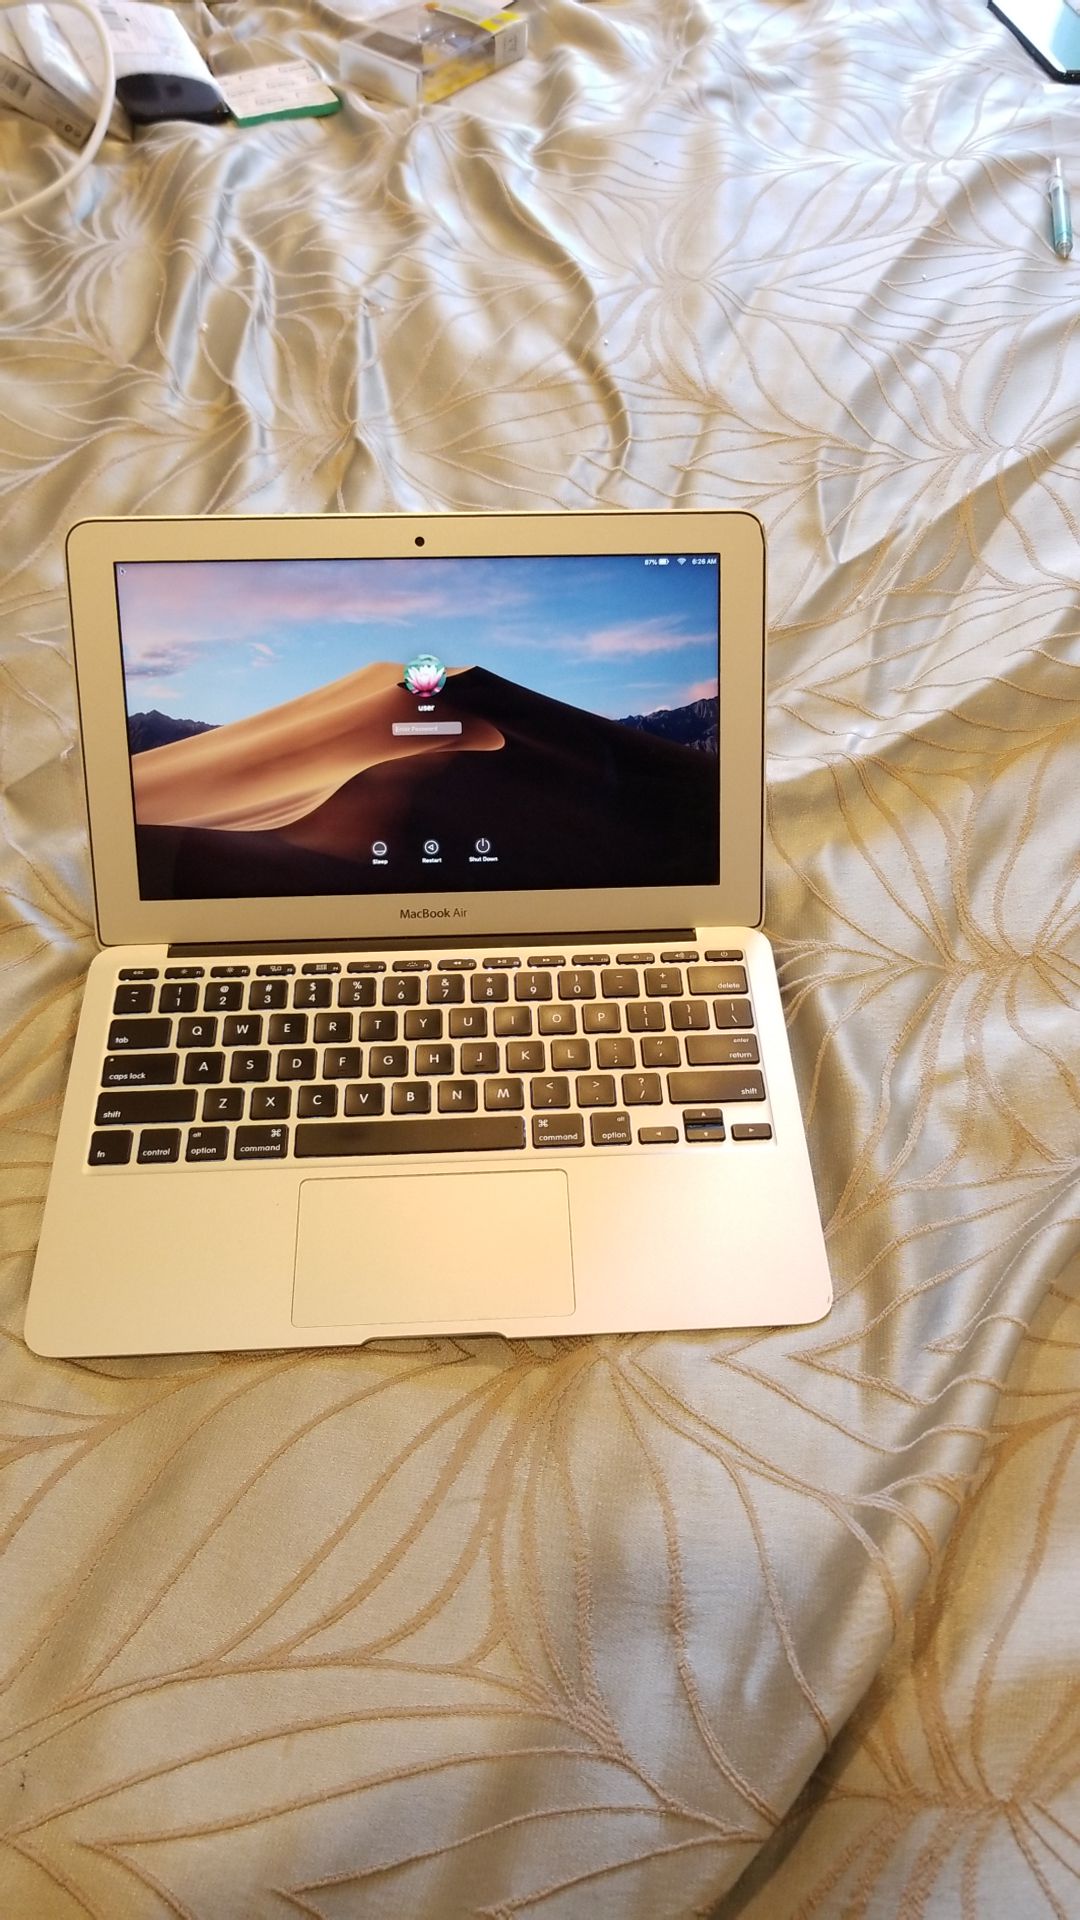 FAST Macbook Air 11 inch 2015 8GB 128GB SSD Mojave installed + Office 2016 + GREAT CONDITION!!!!! MEET YOU IN MD/VA/DC